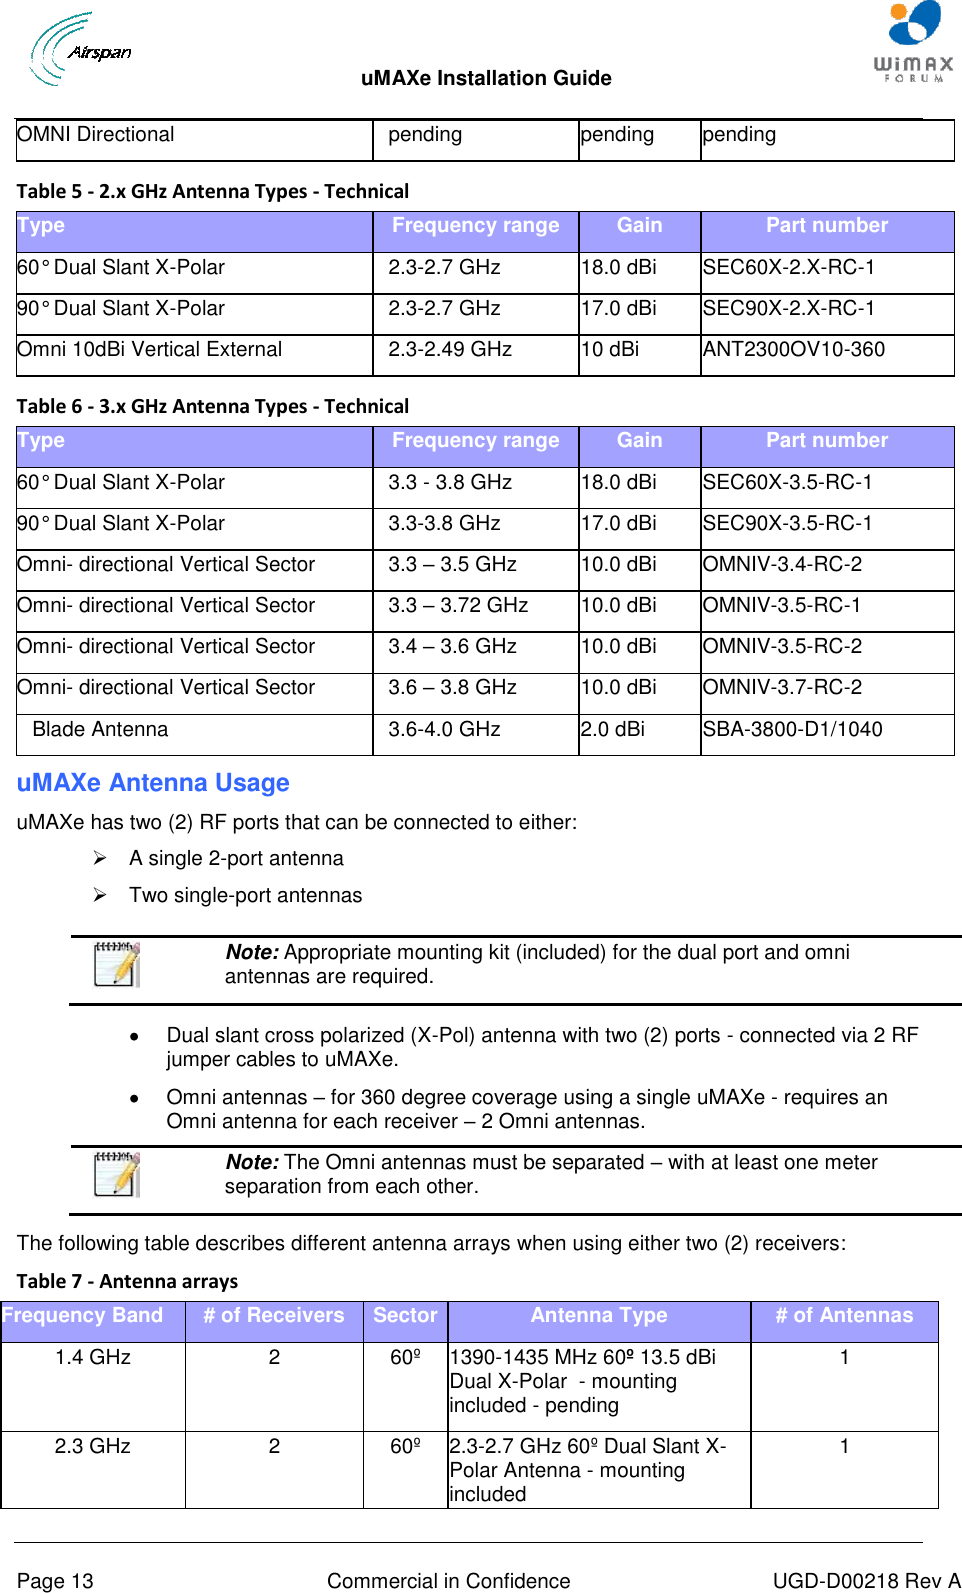  uMAXe Installation Guide       Page 13  Commercial in Confidence  UGD-D00218 Rev A OMNI Directional   pending pending pending  Table 5 - 2.x GHz Antenna Types - Technical Type Frequency range Gain Part number 60° Dual Slant X-Polar  2.3-2.7 GHz 18.0 dBi SEC60X-2.X-RC-1 90° Dual Slant X-Polar  2.3-2.7 GHz 17.0 dBi SEC90X-2.X-RC-1 Omni 10dBi Vertical External 2.3-2.49 GHz 10 dBi ANT2300OV10-360  Table 6 - 3.x GHz Antenna Types - Technical Type Frequency range Gain Part number 60° Dual Slant X-Polar  3.3 - 3.8 GHz 18.0 dBi SEC60X-3.5-RC-1 90° Dual Slant X-Polar  3.3-3.8 GHz 17.0 dBi SEC90X-3.5-RC-1 Omni- directional Vertical Sector 3.3 – 3.5 GHz 10.0 dBi OMNIV-3.4-RC-2 Omni- directional Vertical Sector 3.3 – 3.72 GHz 10.0 dBi OMNIV-3.5-RC-1 Omni- directional Vertical Sector 3.4 – 3.6 GHz 10.0 dBi OMNIV-3.5-RC-2 Omni- directional Vertical Sector 3.6 – 3.8 GHz 10.0 dBi OMNIV-3.7-RC-2 Blade Antenna 3.6-4.0 GHz 2.0 dBi SBA-3800-D1/1040 uMAXe Antenna Usage uMAXe has two (2) RF ports that can be connected to either:   A single 2-port antenna    Two single-port antennas    Note: Appropriate mounting kit (included) for the dual port and omni antennas are required.    Dual slant cross polarized (X-Pol) antenna with two (2) ports - connected via 2 RF jumper cables to uMAXe.   Omni antennas – for 360 degree coverage using a single uMAXe - requires an Omni antenna for each receiver – 2 Omni antennas.  Note: The Omni antennas must be separated – with at least one meter separation from each other.   The following table describes different antenna arrays when using either two (2) receivers: Table 7 - Antenna arrays Frequency Band # of Receivers Sector Antenna Type # of Antennas  1.4 GHz 2 60º 1390-1435 MHz 60º 13.5 dBi Dual X-Polar  - mounting included - pending 1 2.3 GHz 2 60º 2.3-2.7 GHz 60º Dual Slant X-Polar Antenna - mounting included 1 